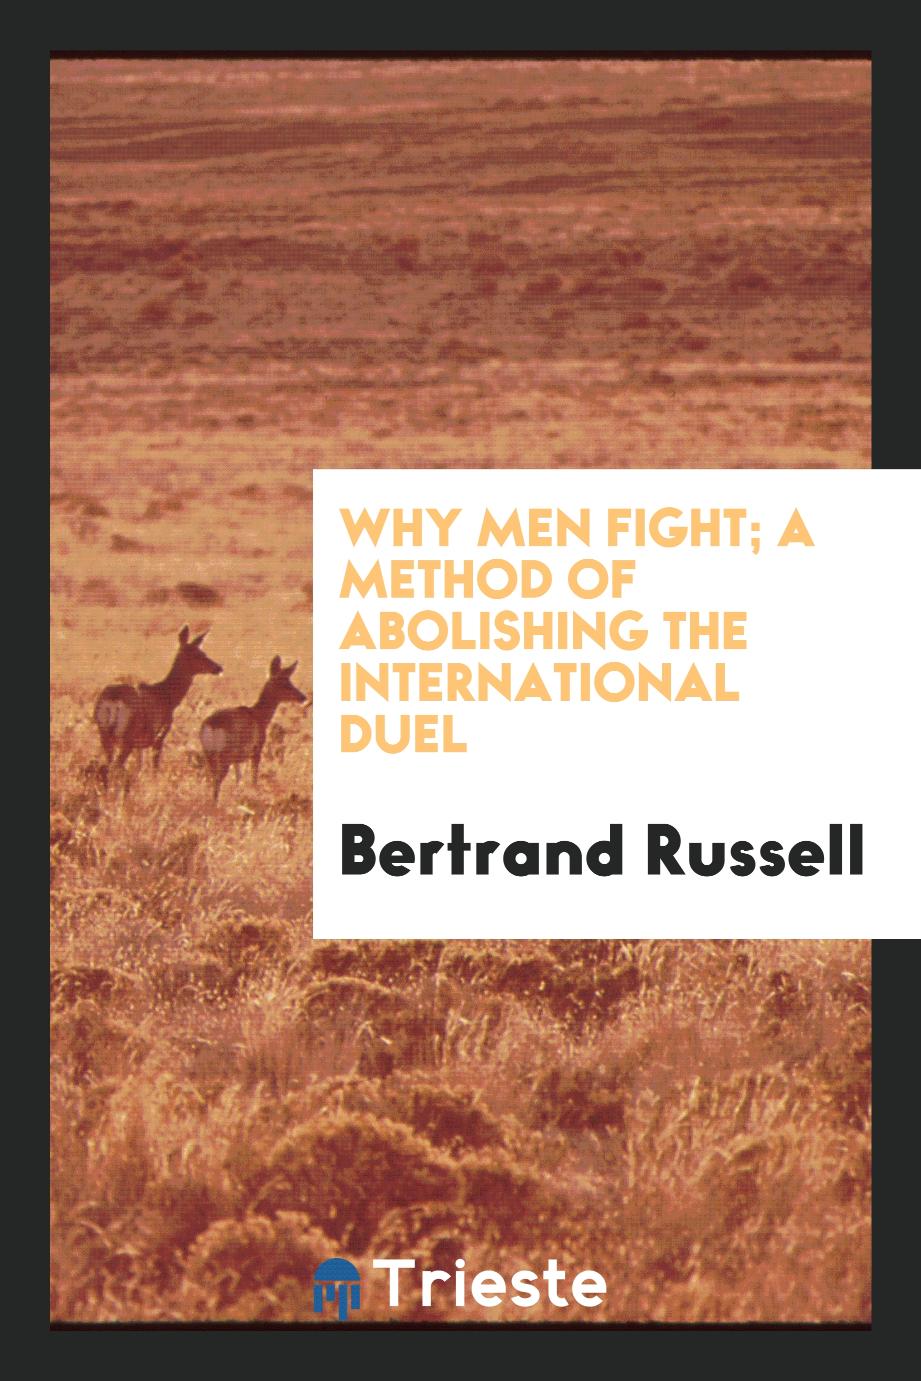 Why men fight; a method of abolishing the international duel